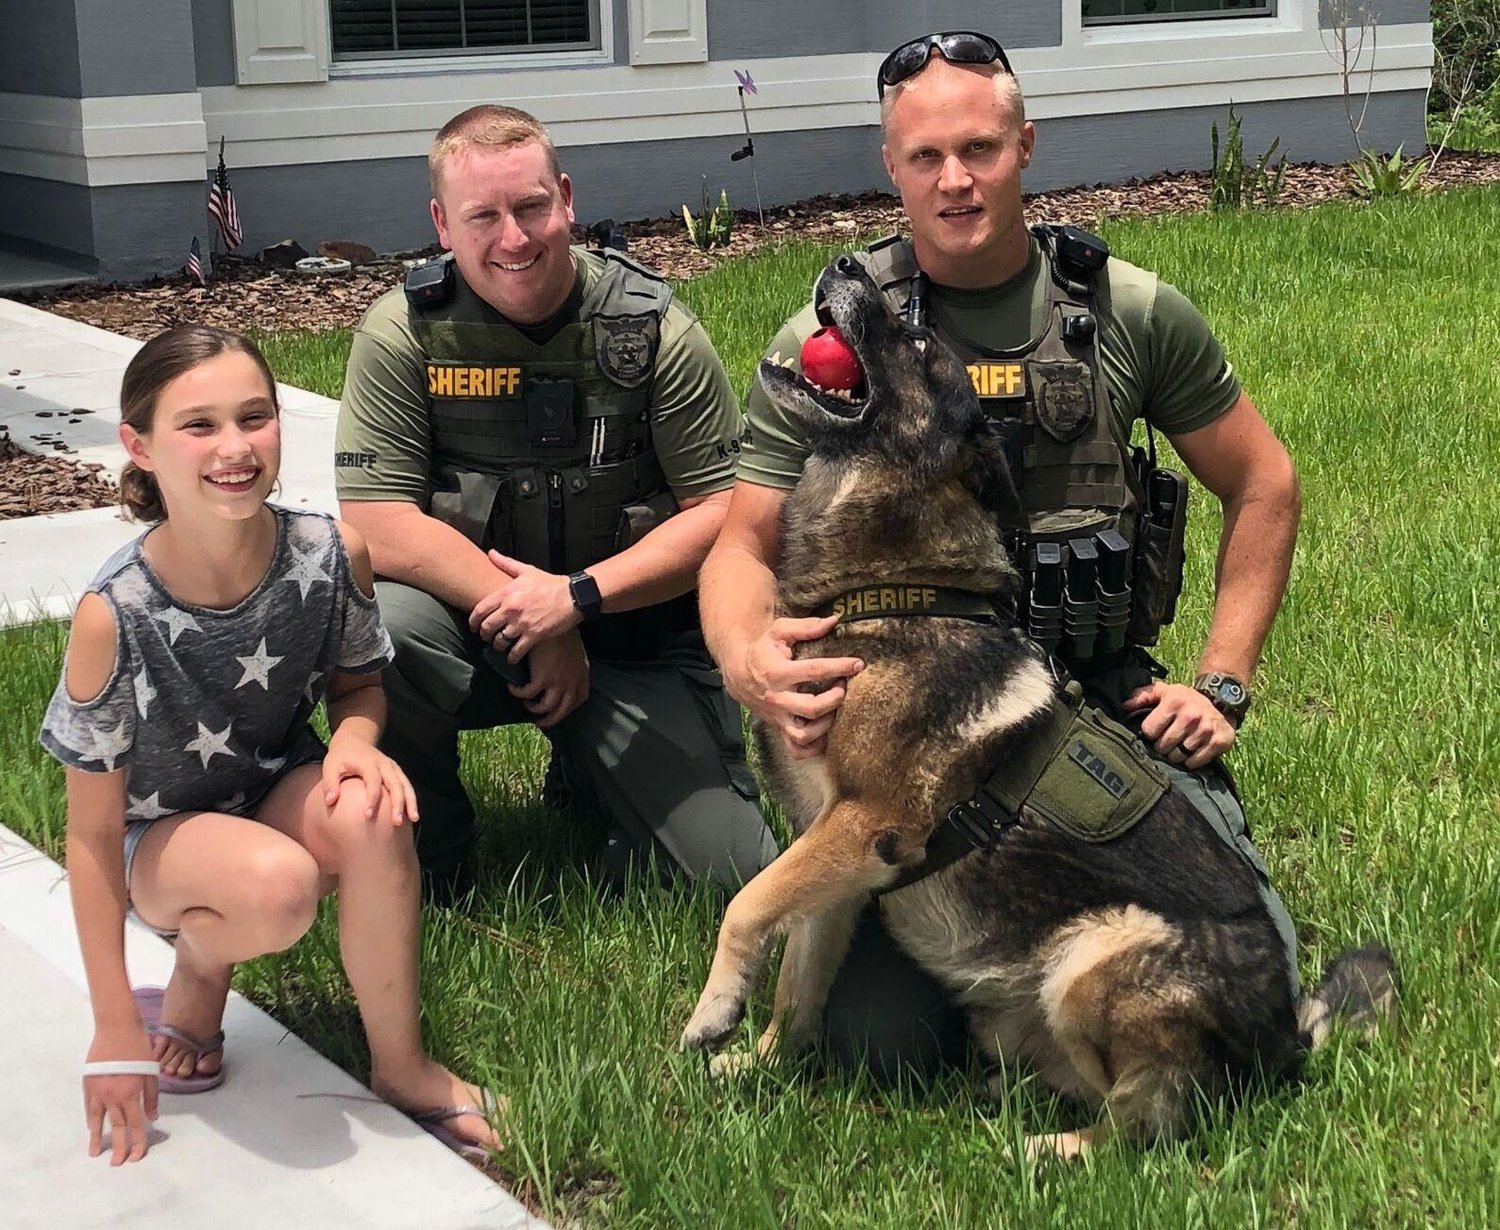 Emma Stanford, Chief Jonathan Welker, and Sgt. Robert Tarczewski and his partner K9 Tag, June 2018.